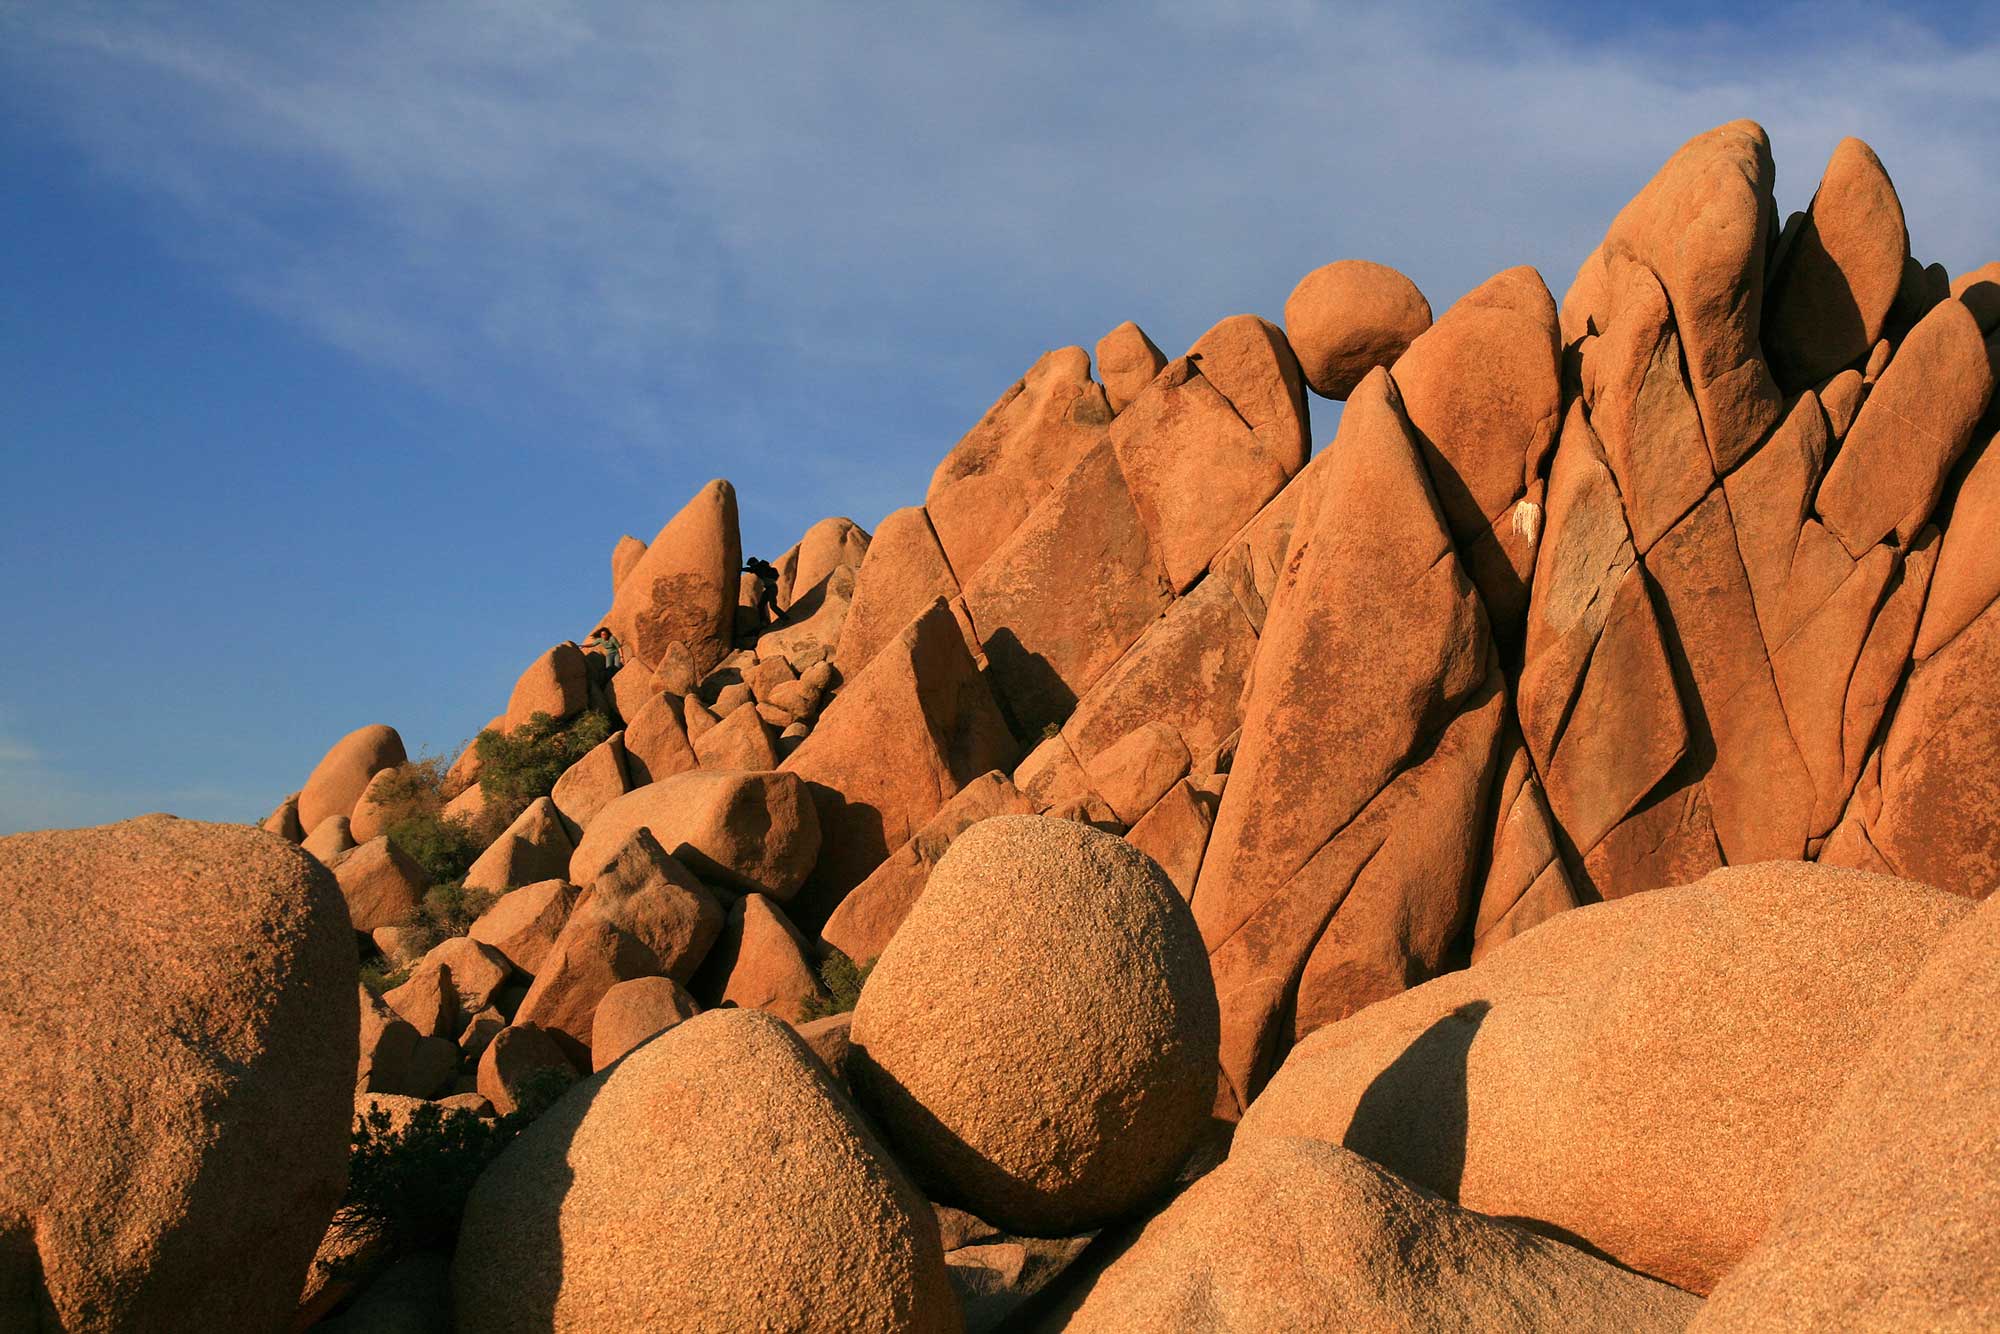 Photograph of the "giant marbles" at Joshua Tree National Park in California.